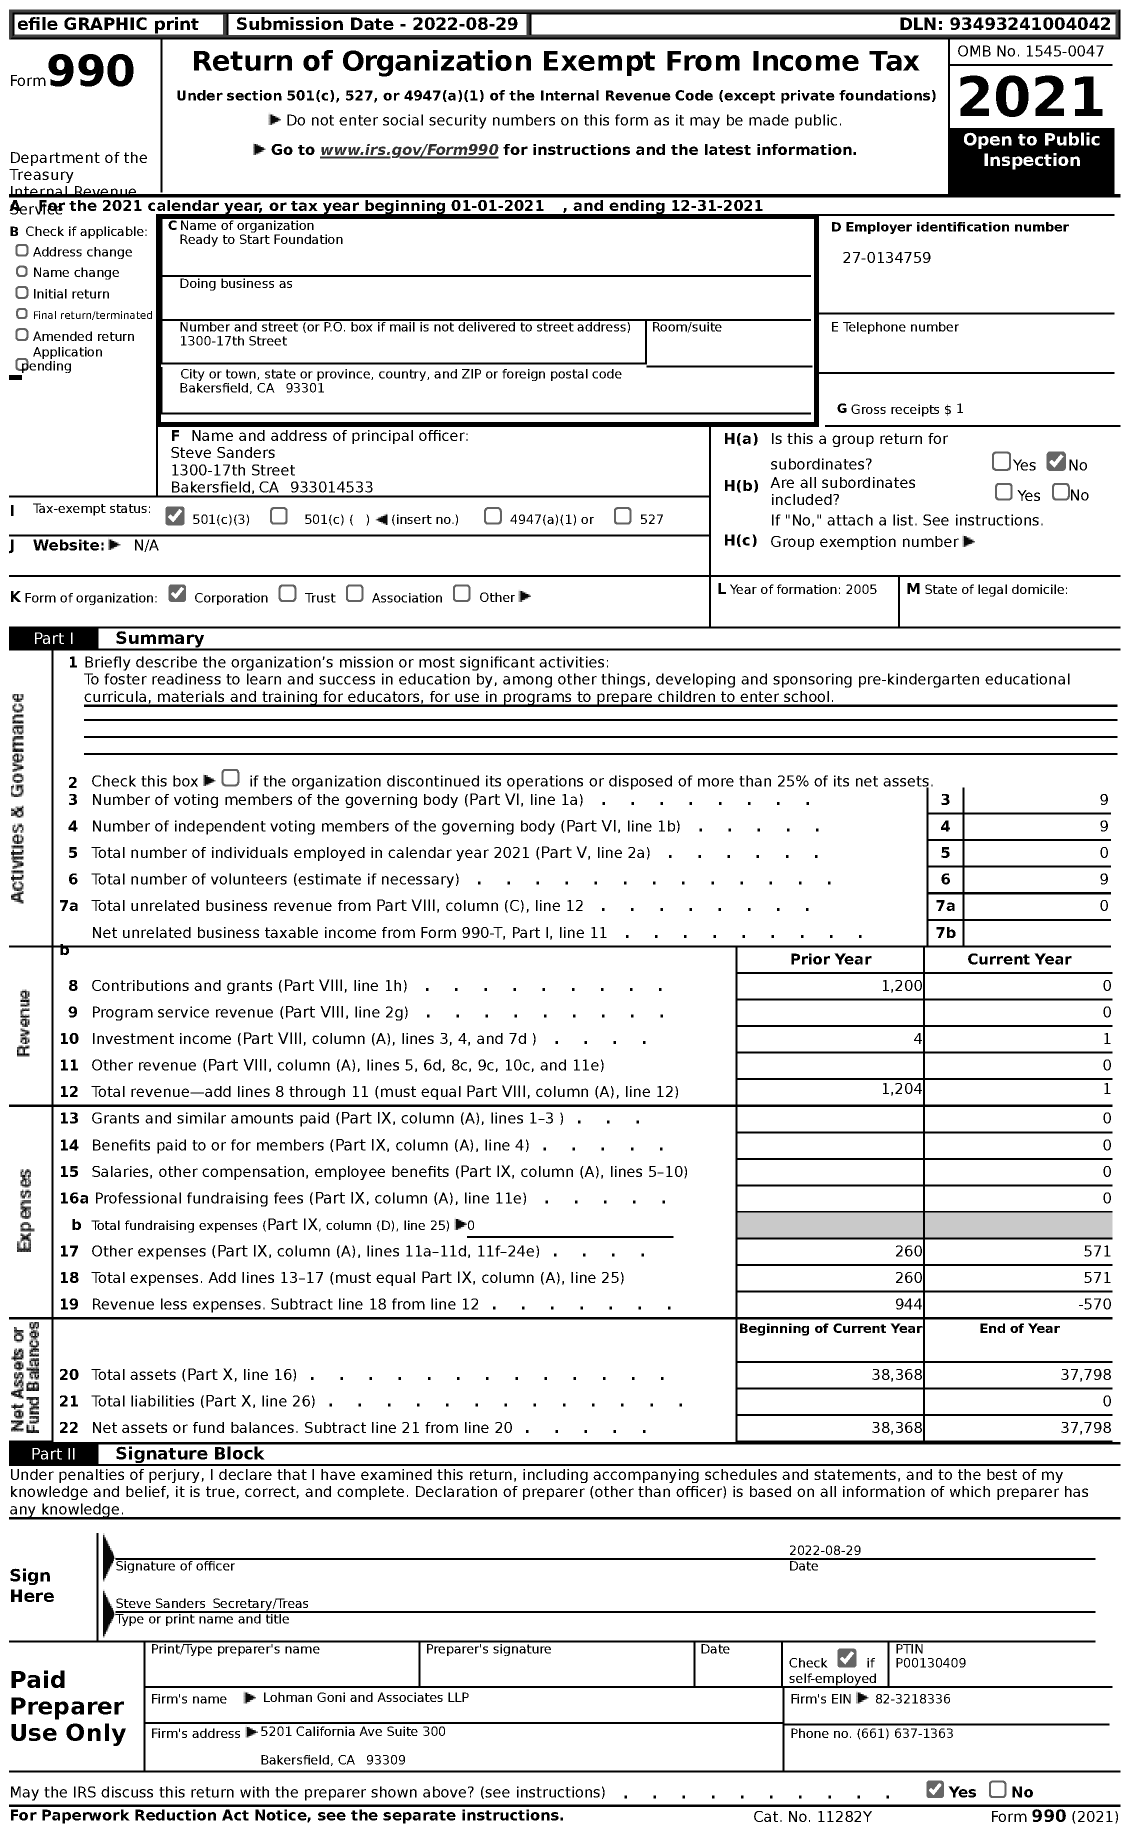 Image of first page of 2021 Form 990 for Ready to Start Foundation